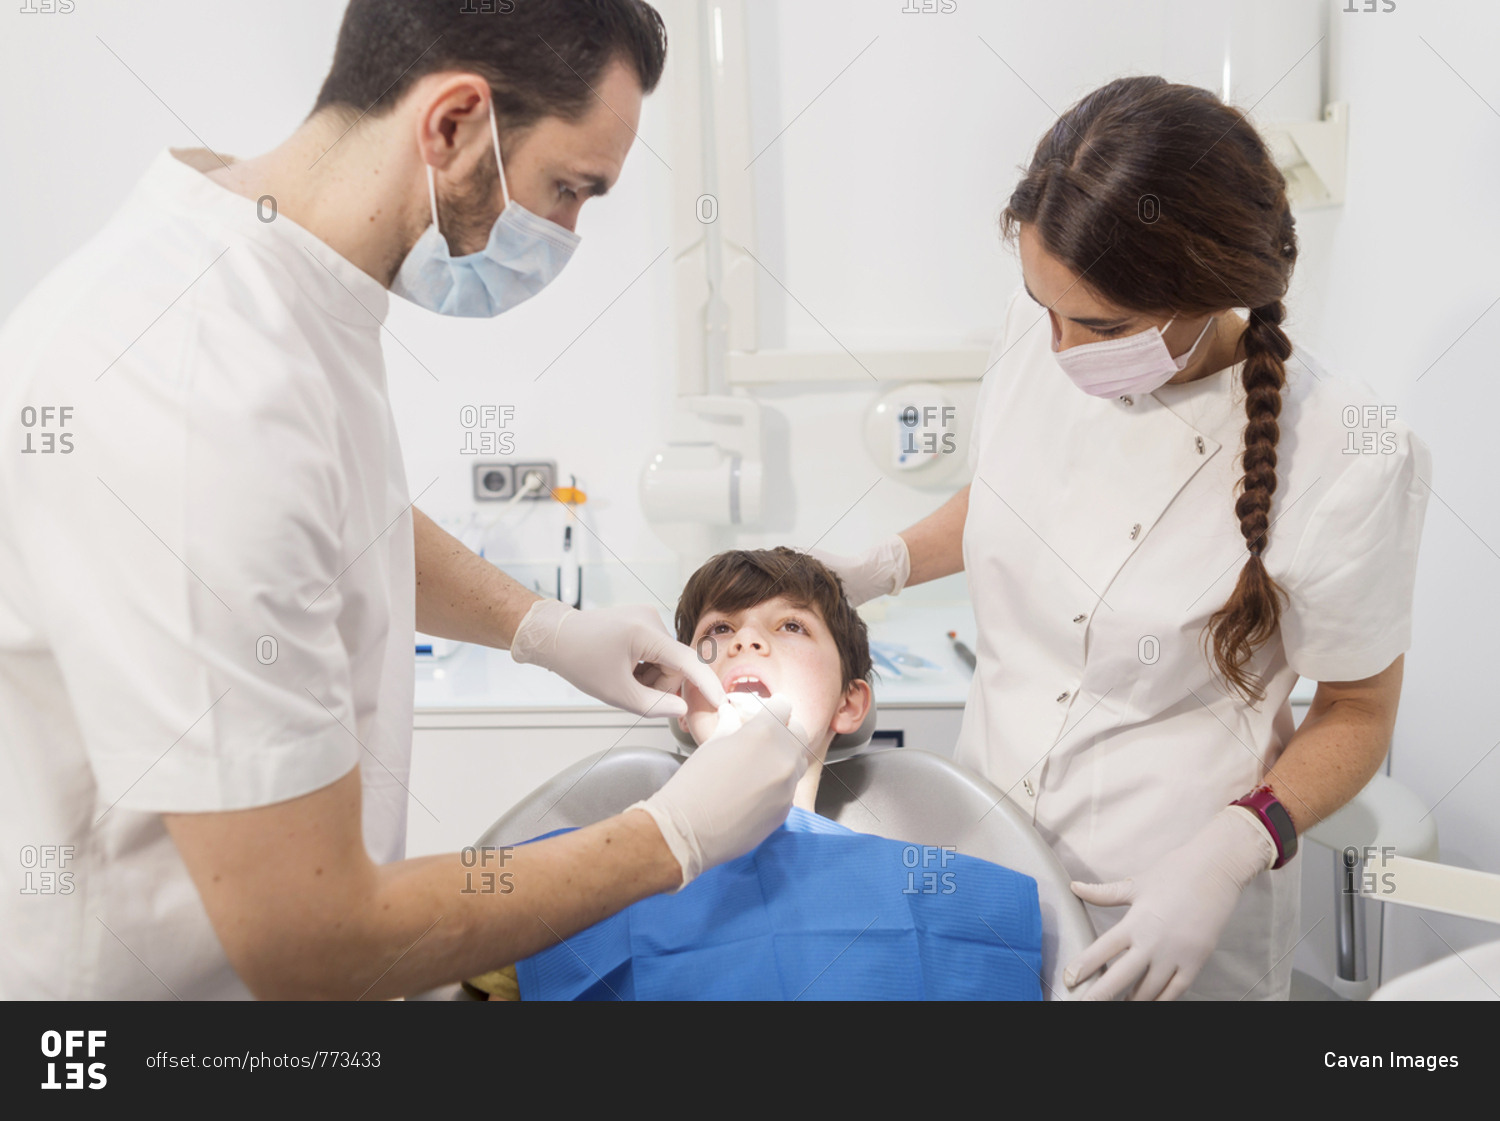 Dentist examining patient's teeth by assistant in medical clinic